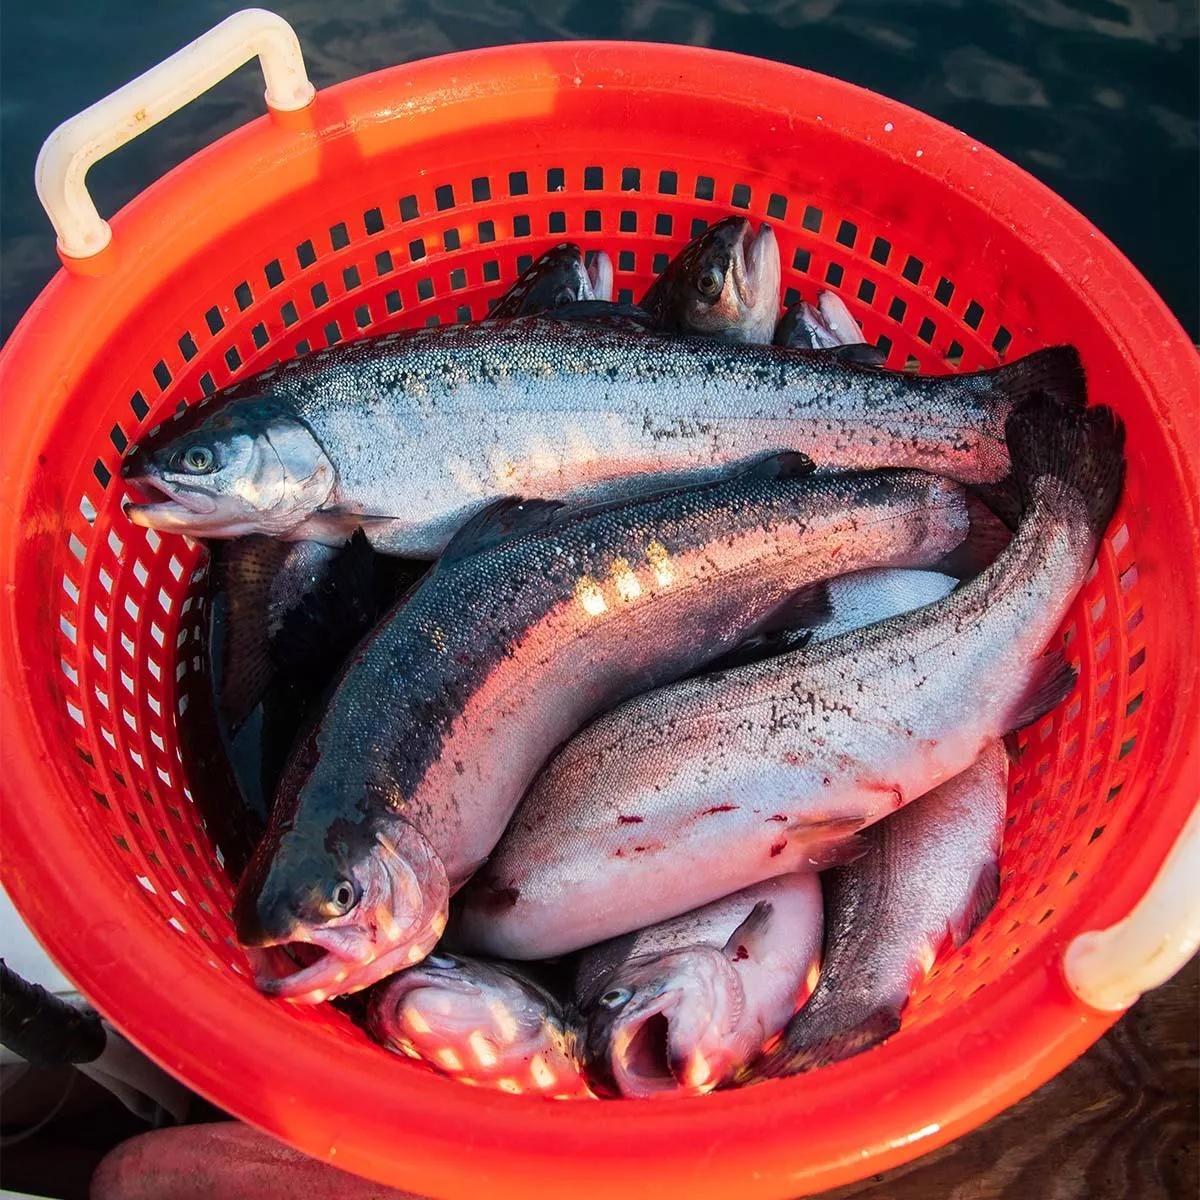 A photo of steelhead trout in an organic plastic bin with holes to let the water out. The trout are recently caught and slick with water.